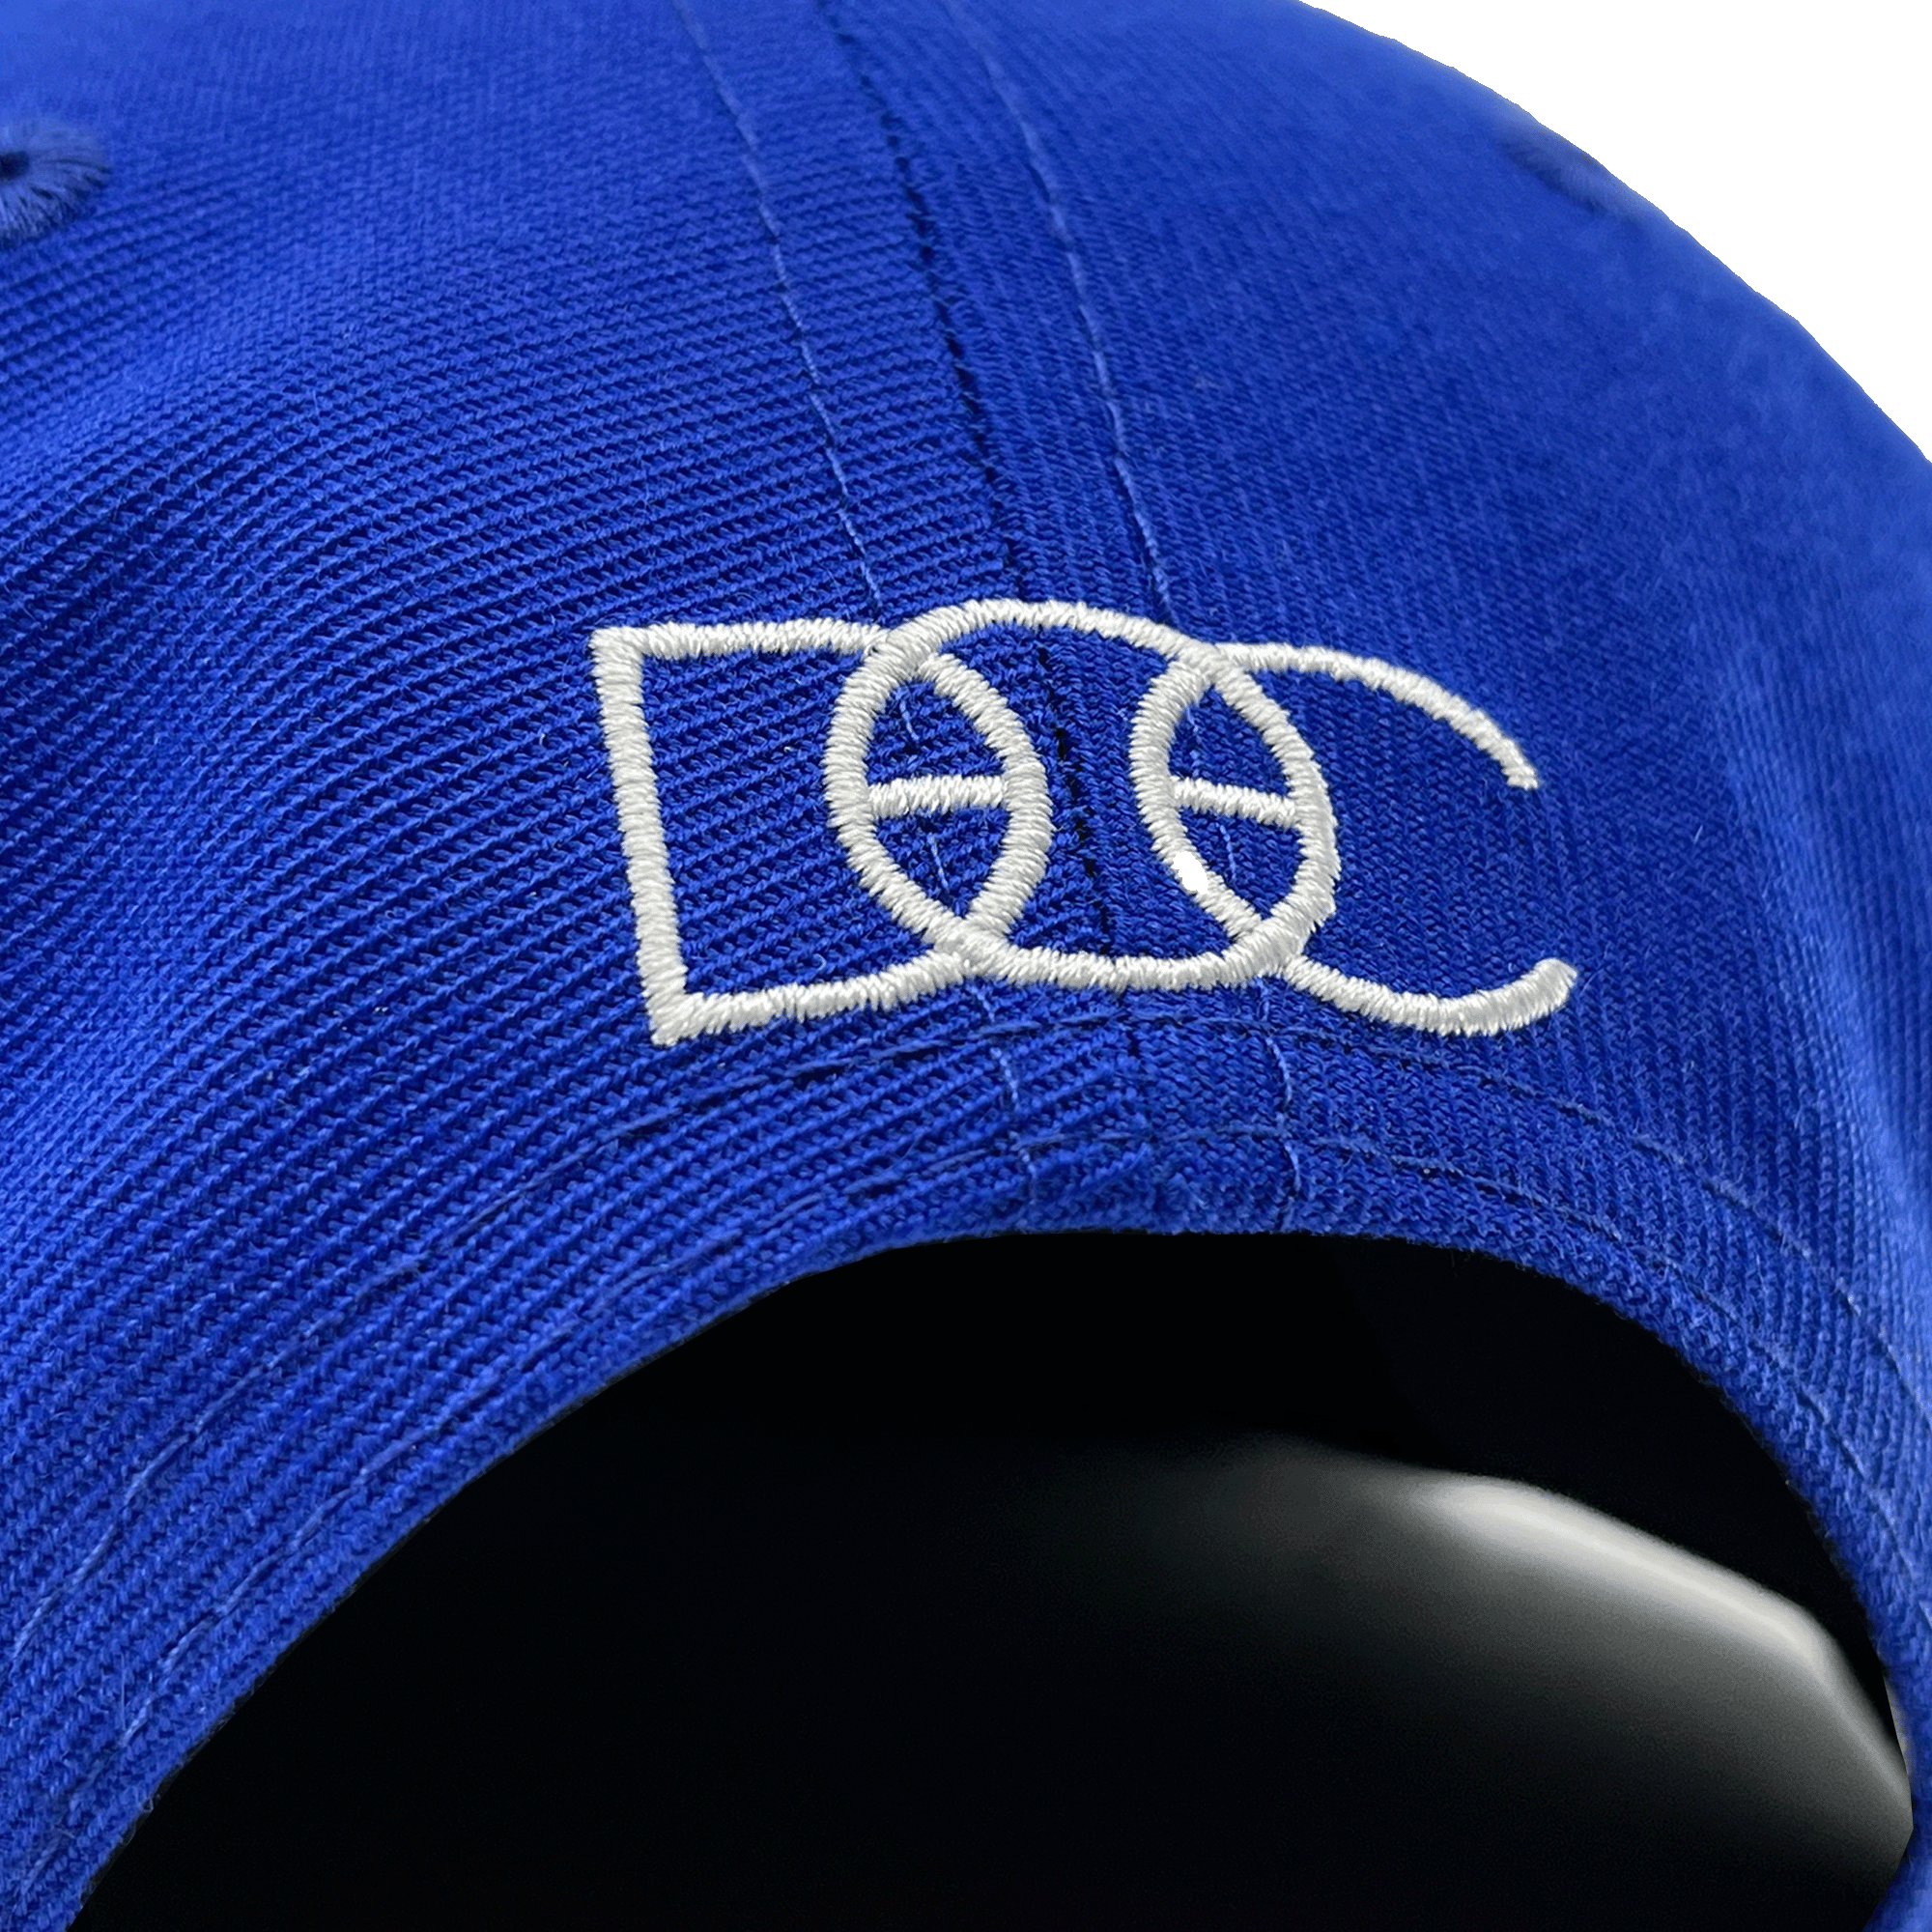 Close-up of white embroidered overlapping DOC wordmark on the back of a royal blue hat.